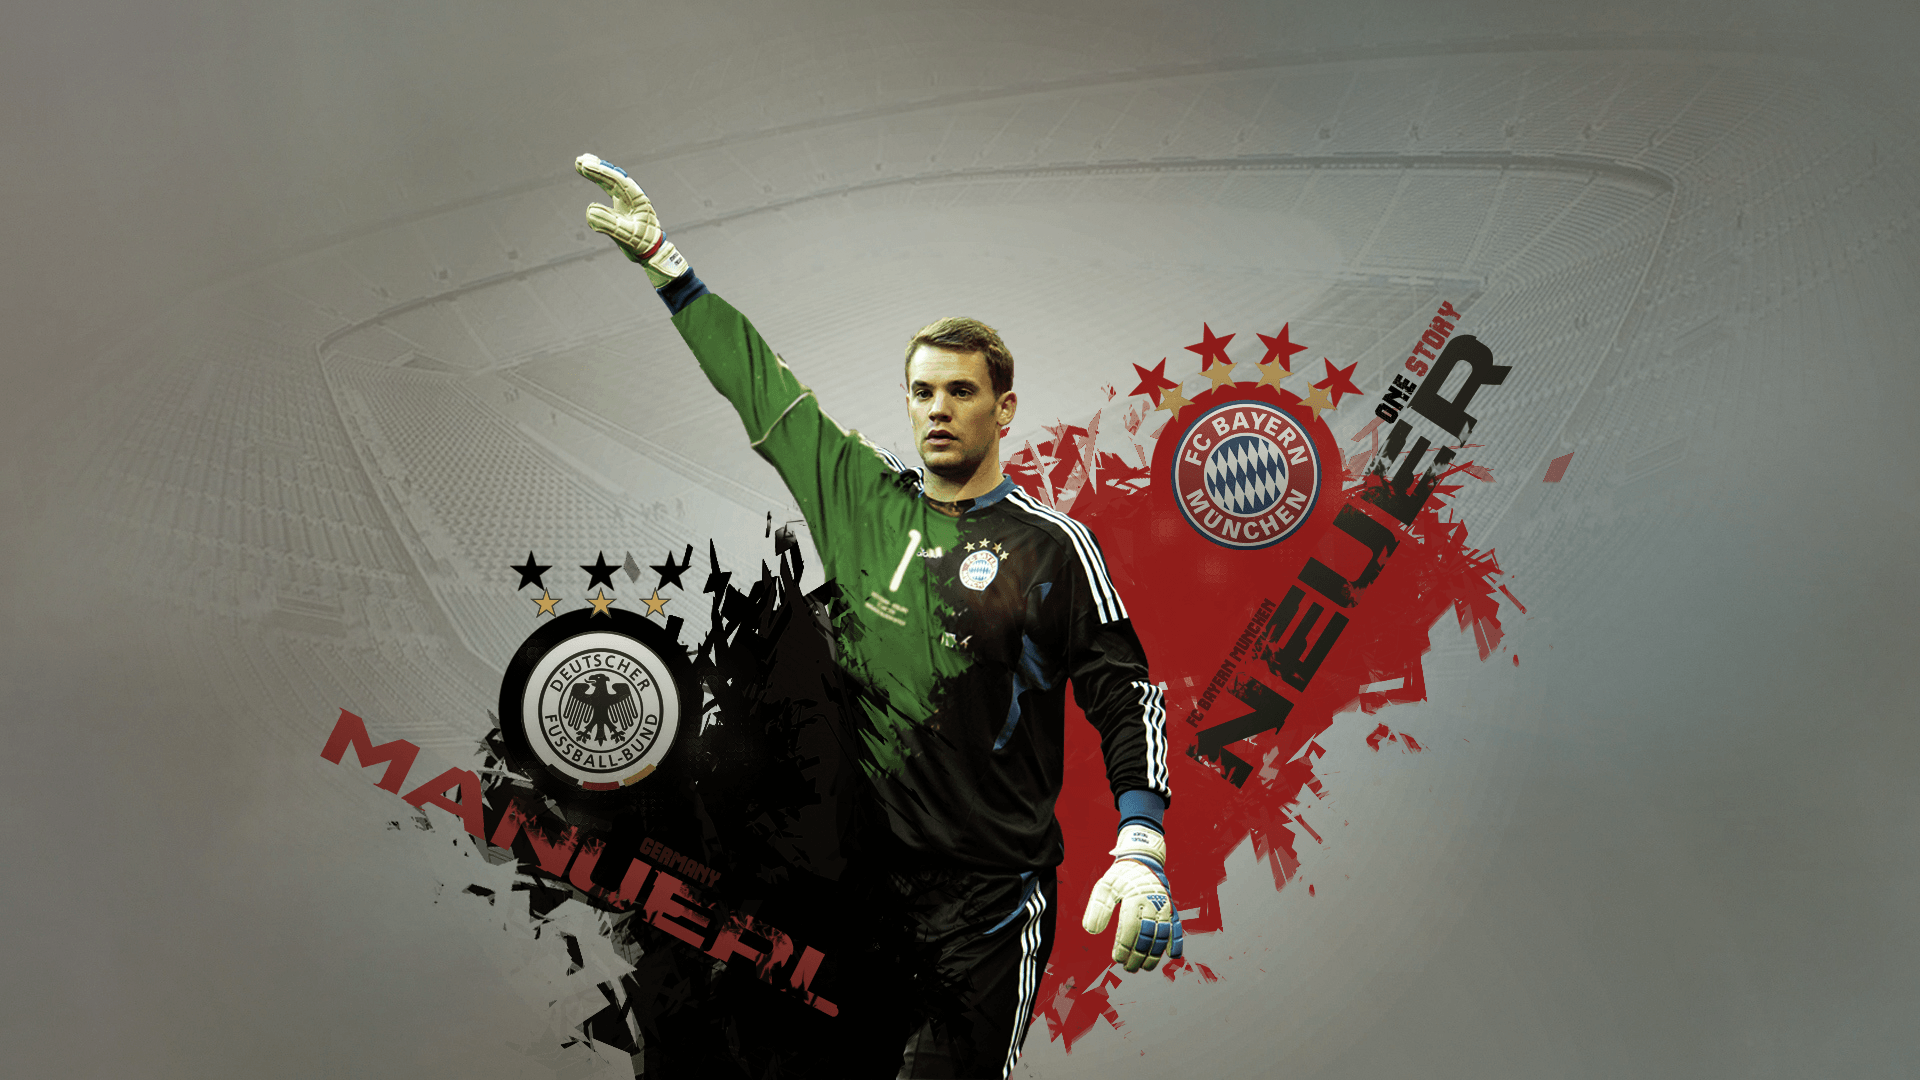 Manuel Neuer Wallpaper High Resolution and Quality Download